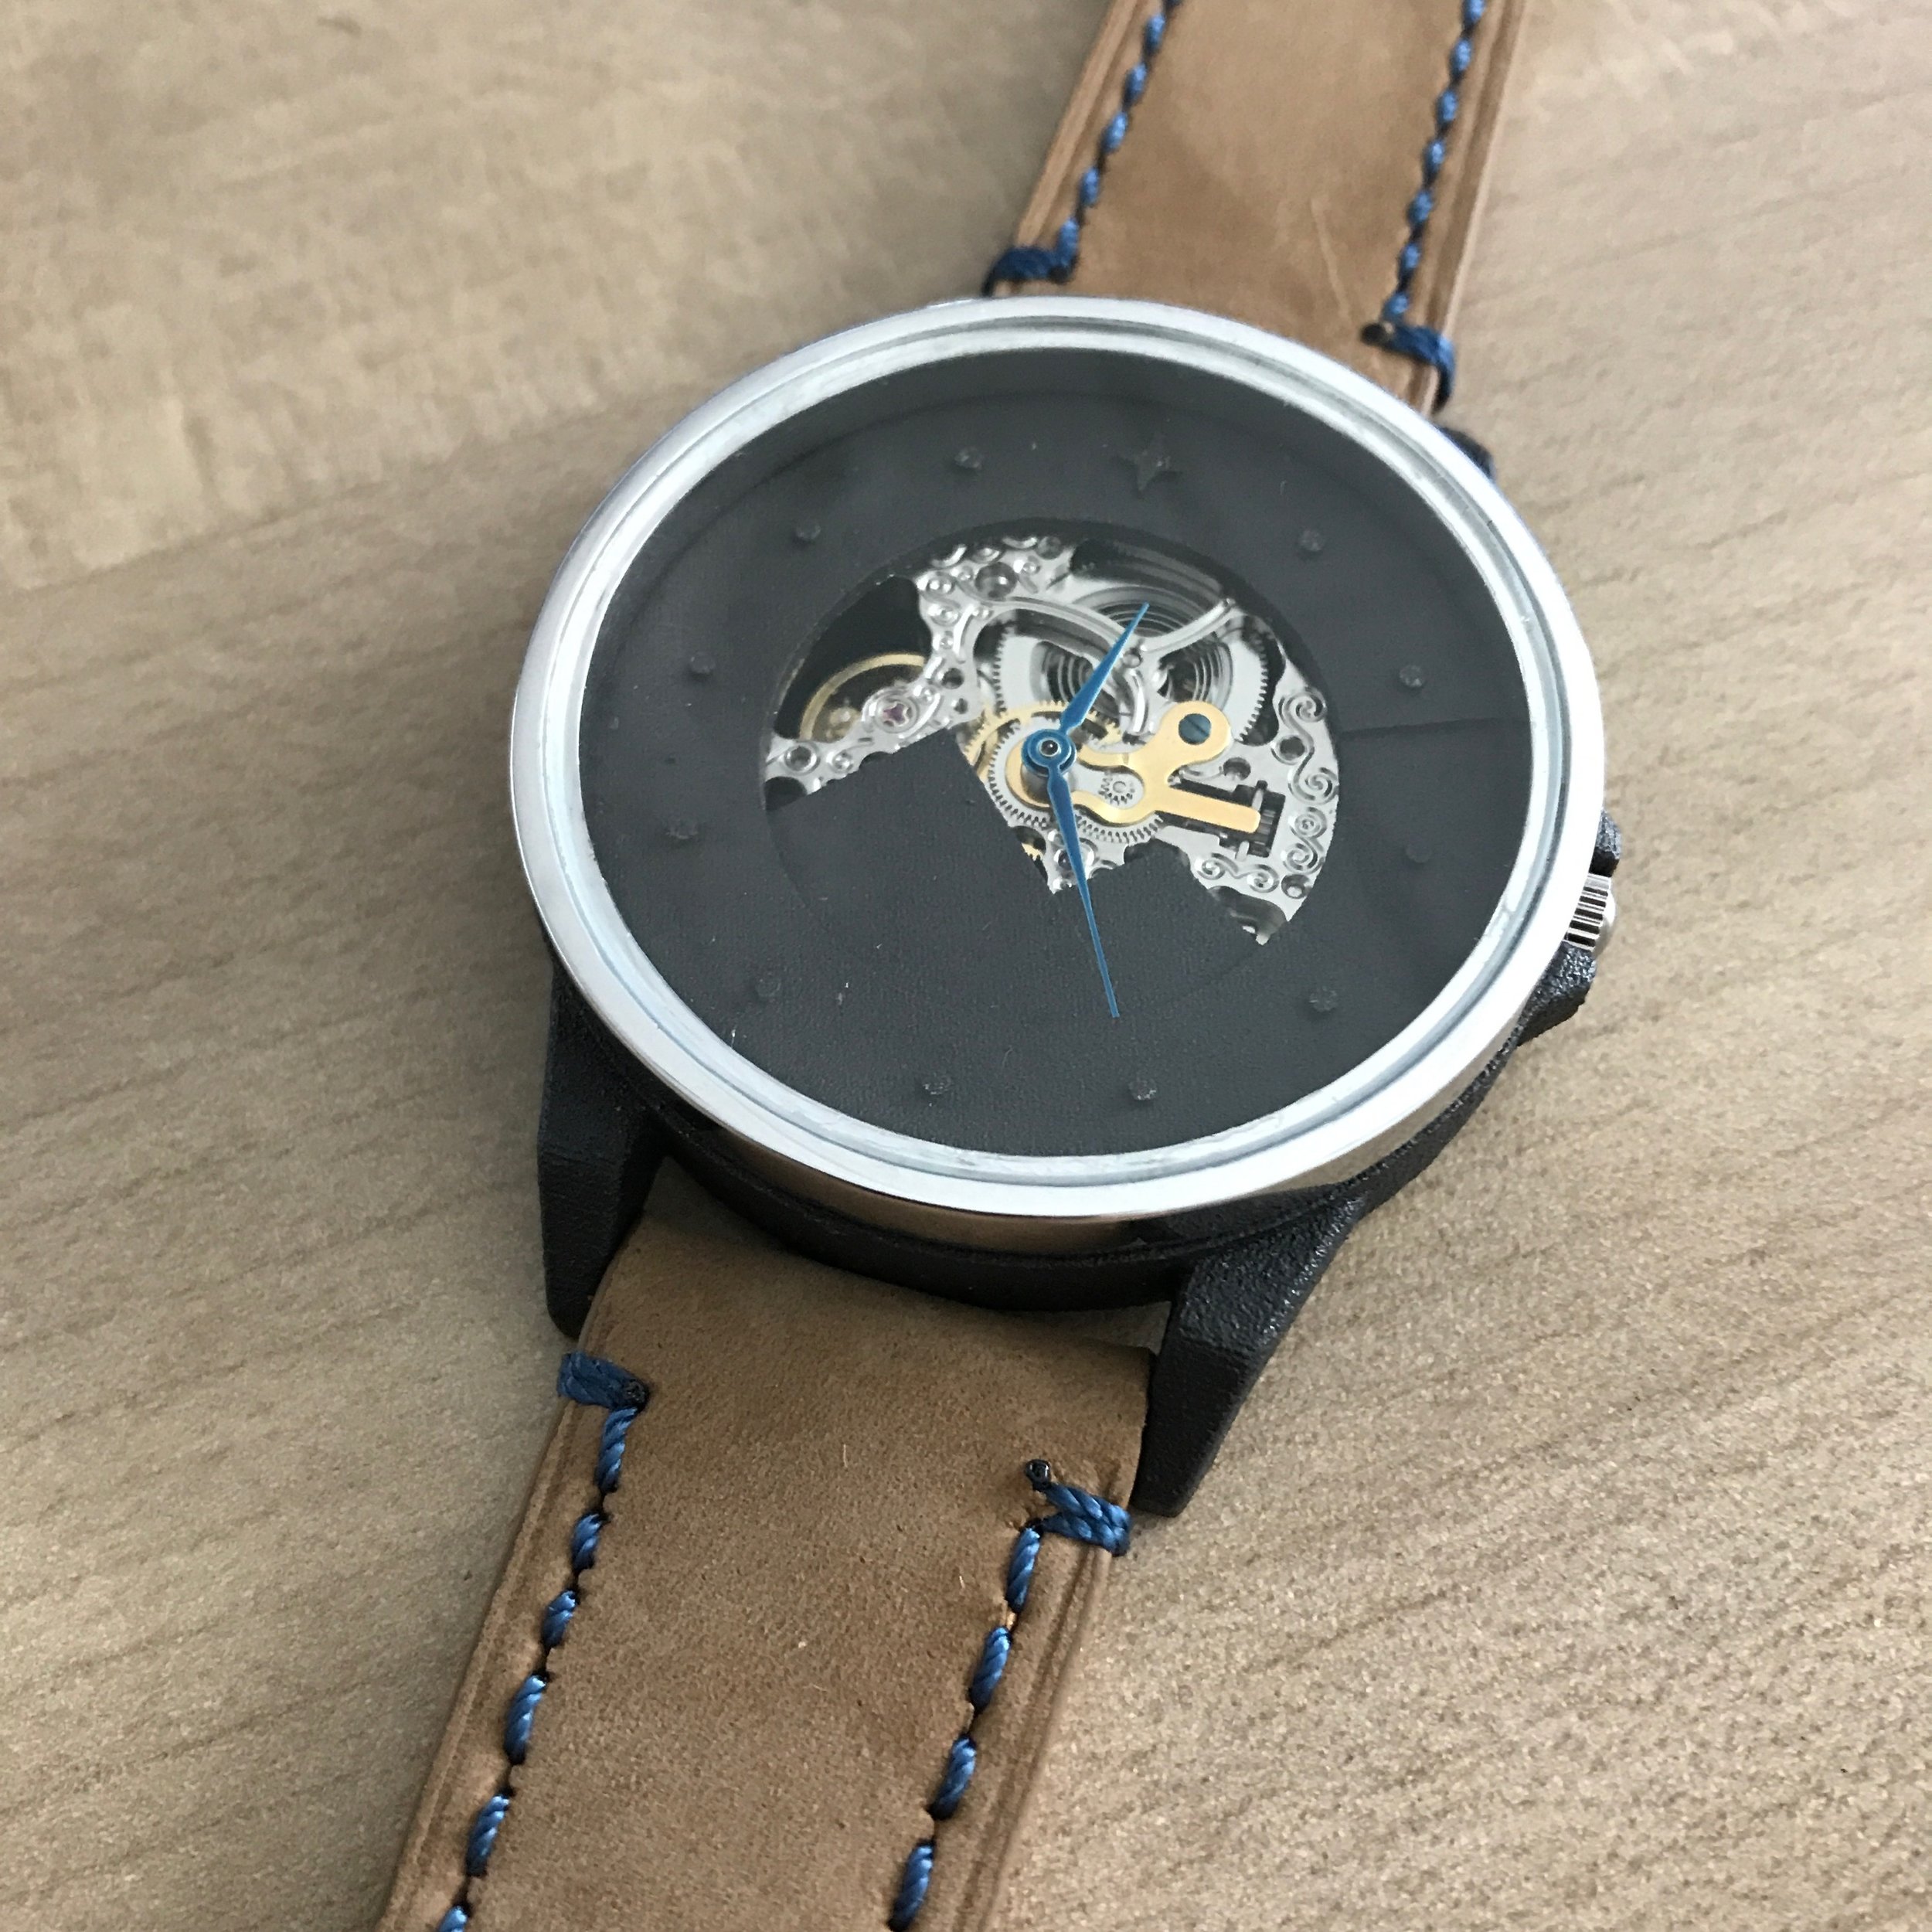 3D PRINTED WATCHES